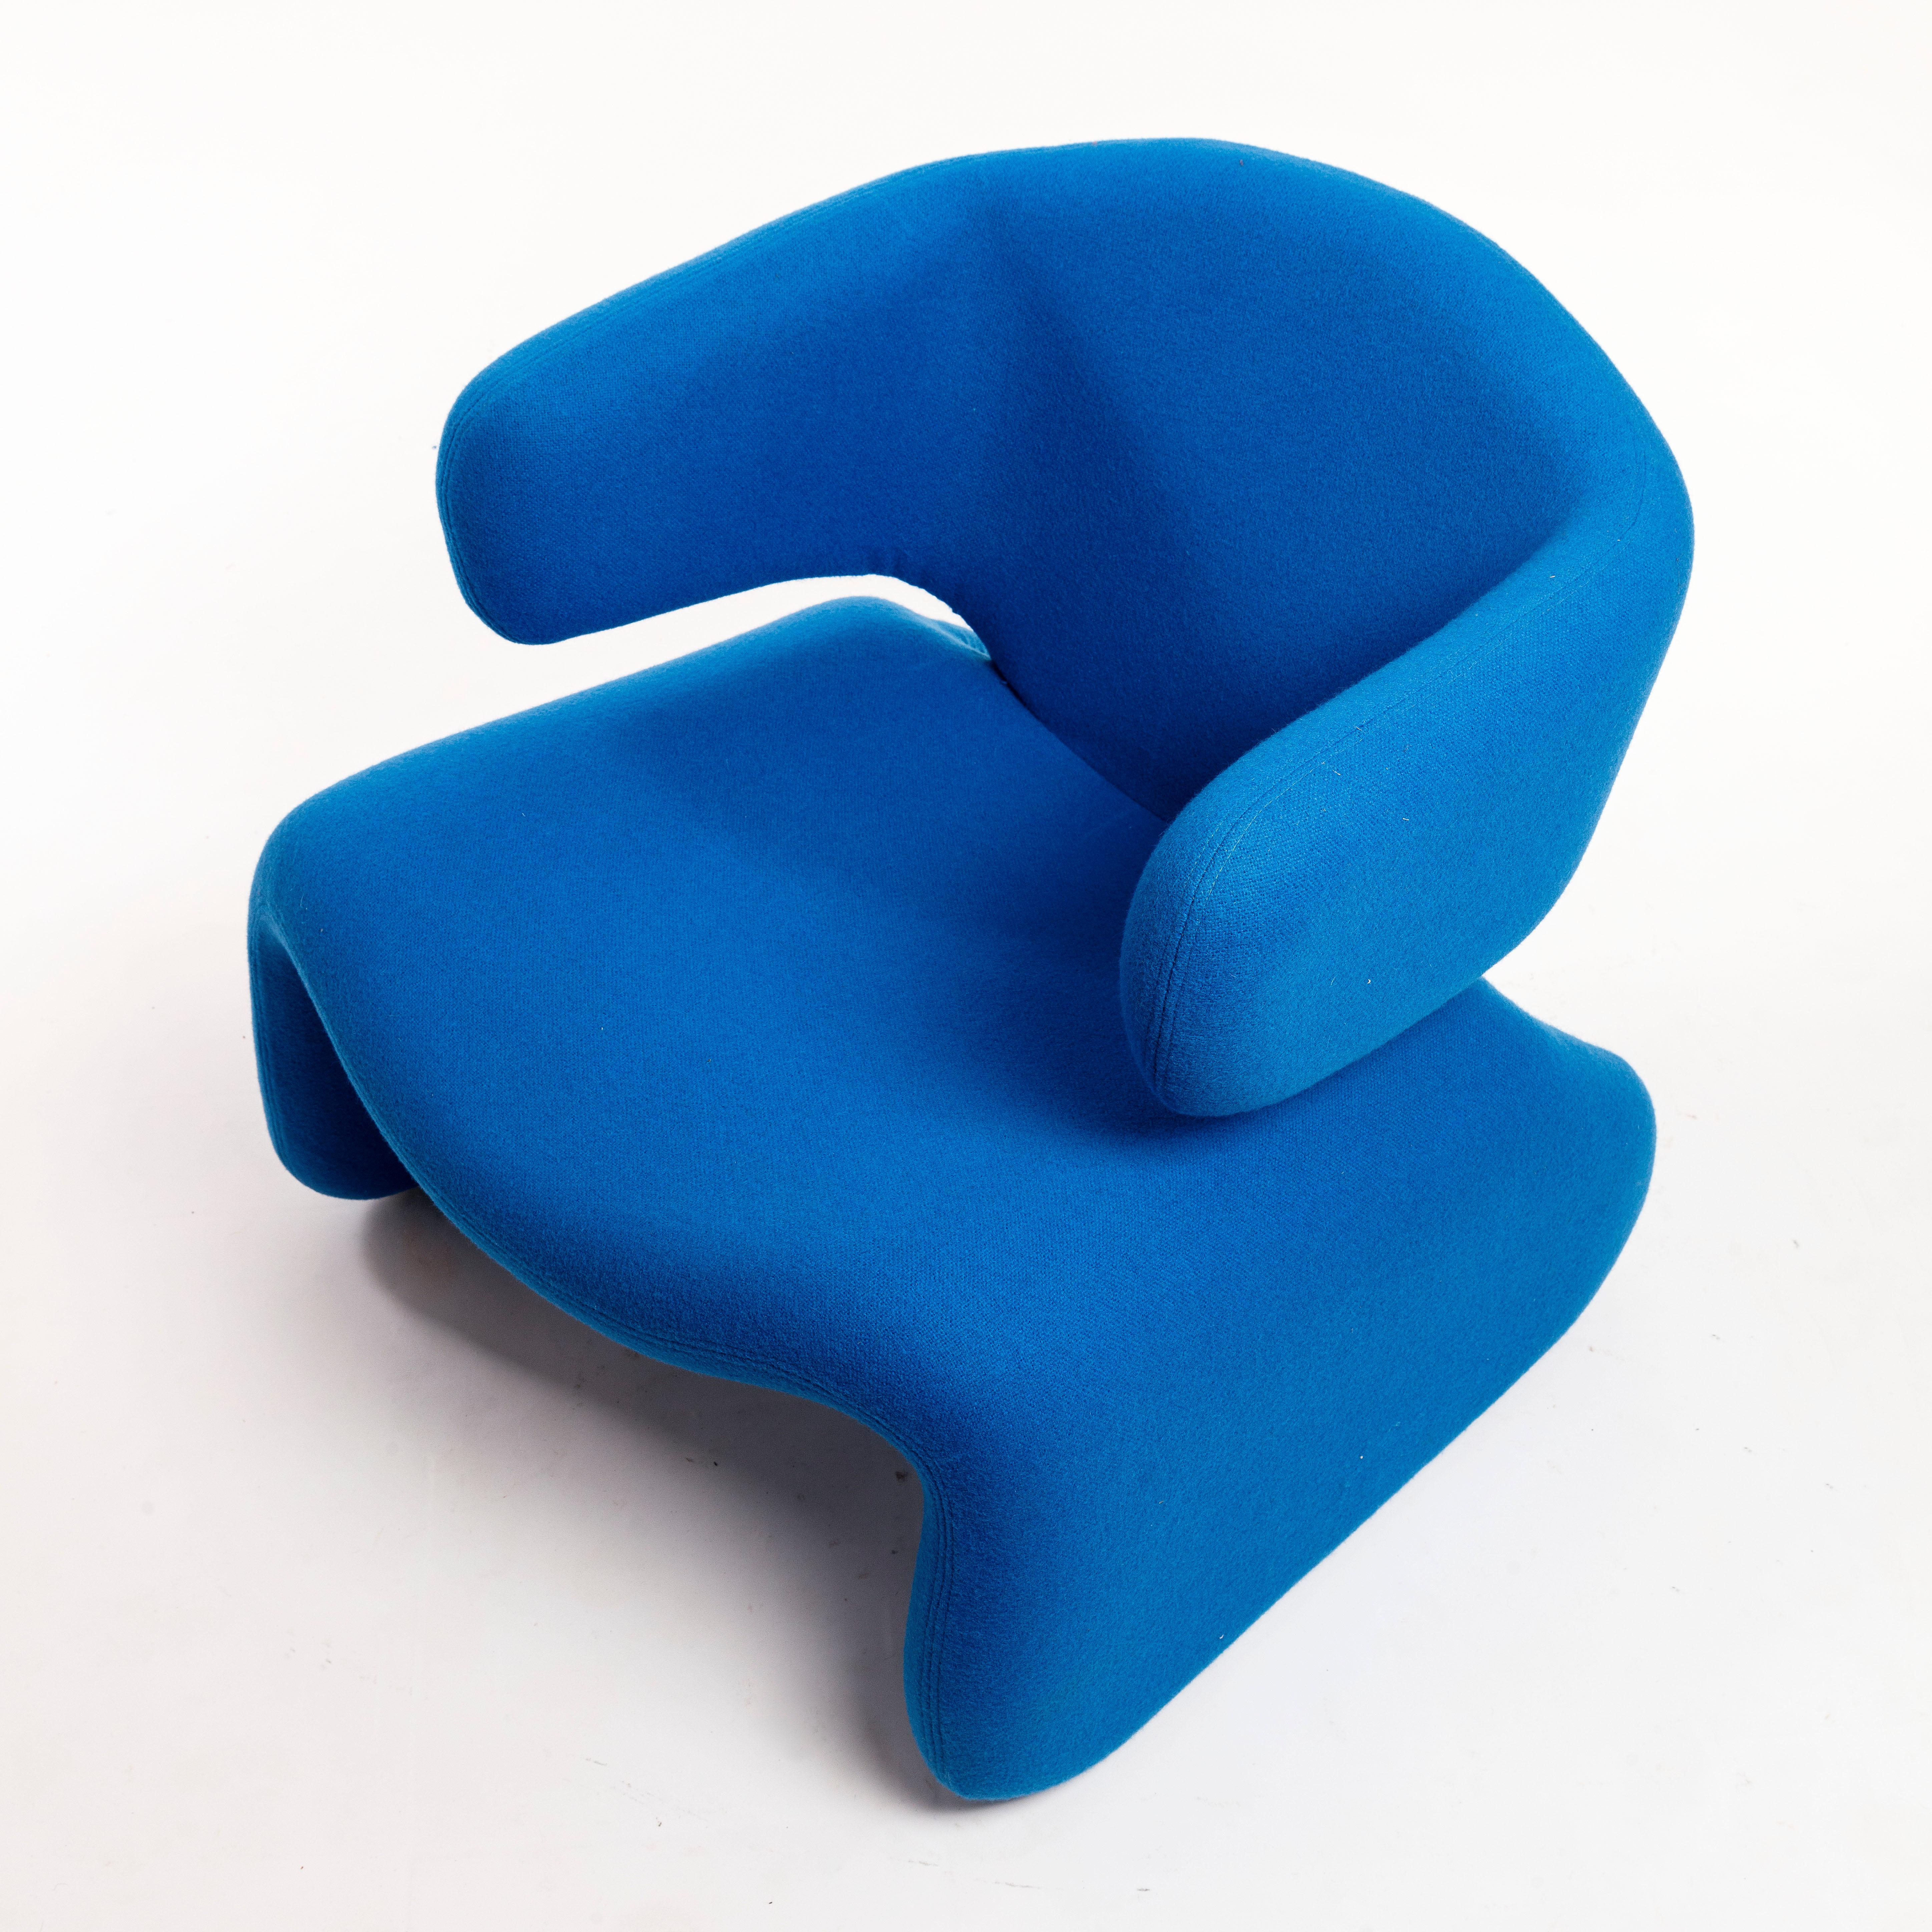 Olivier Mourgue Djinn Blue Armchair for Airborne 1960s New Kvadrat Fabric 10